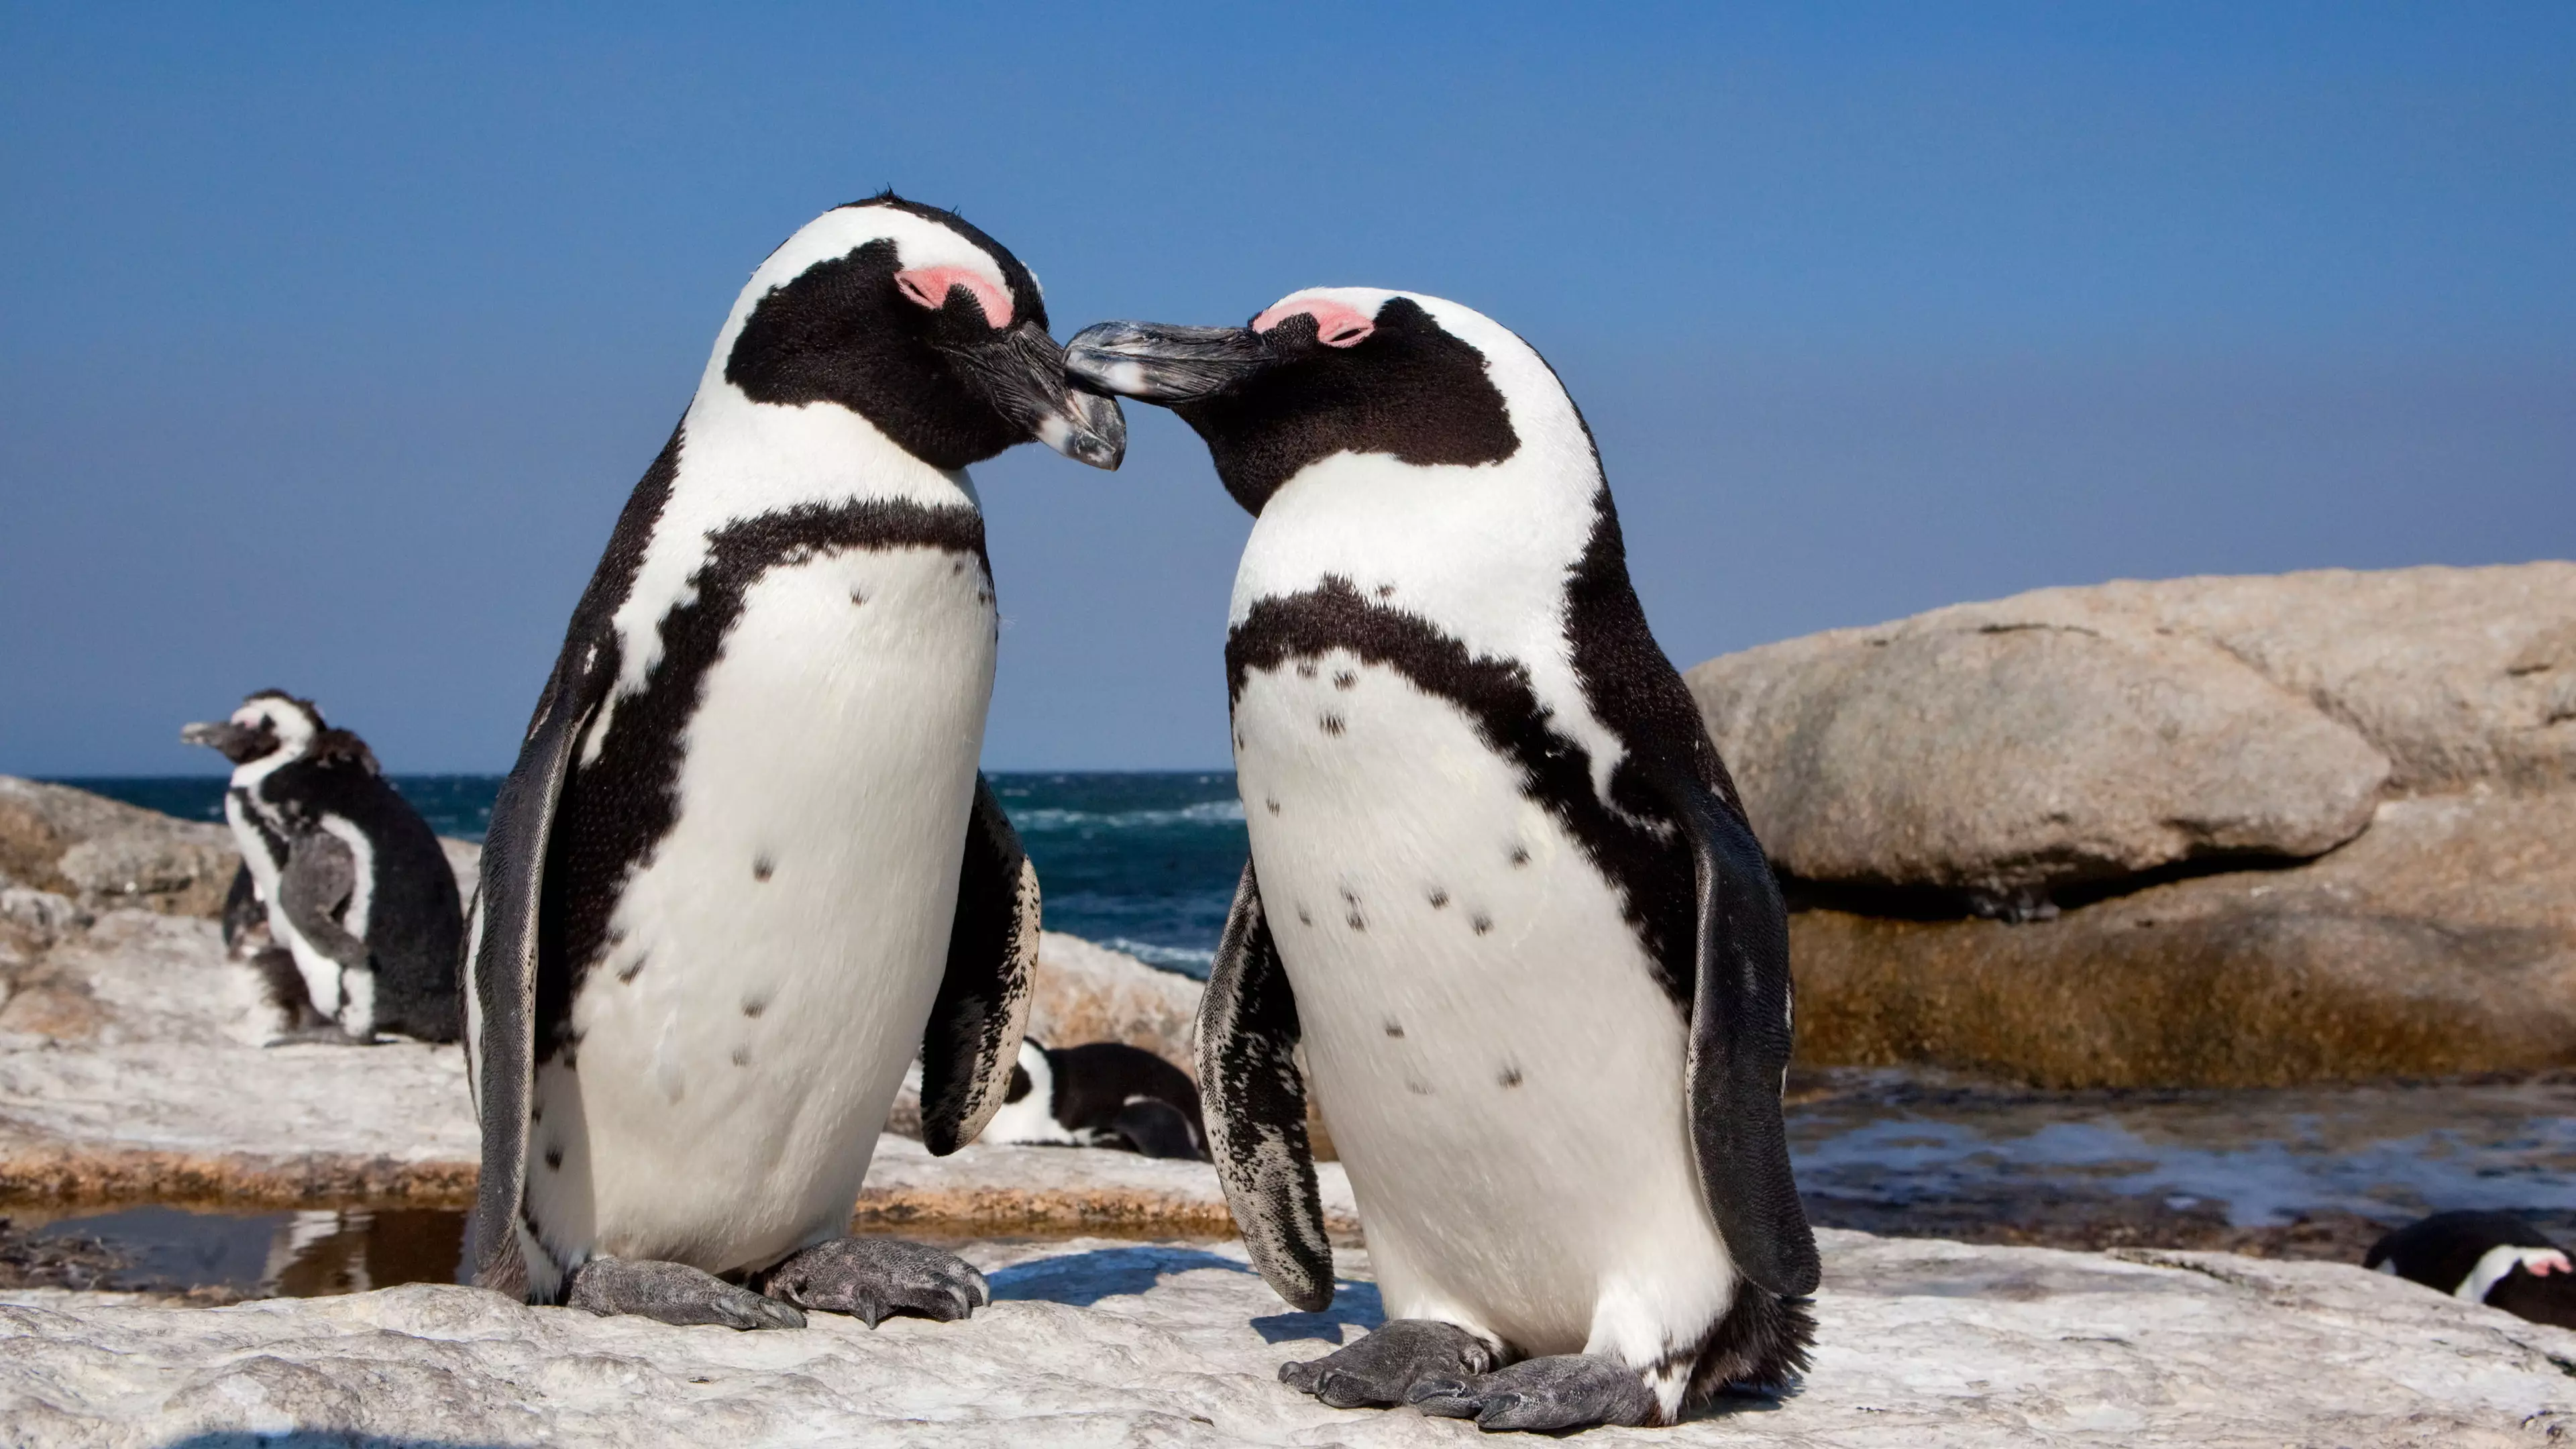 Swarm Of Bees Kills More Than 60 Endangered Penguins In South Africa 